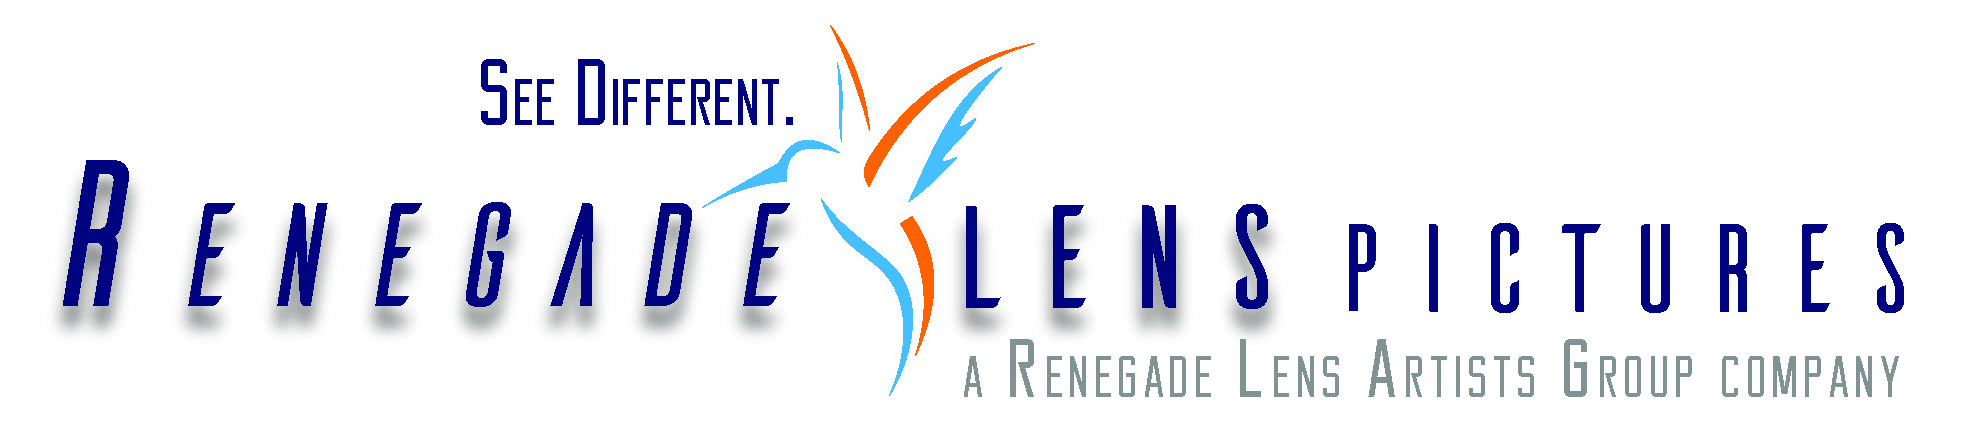 Logo of Renegade Lens Pictures